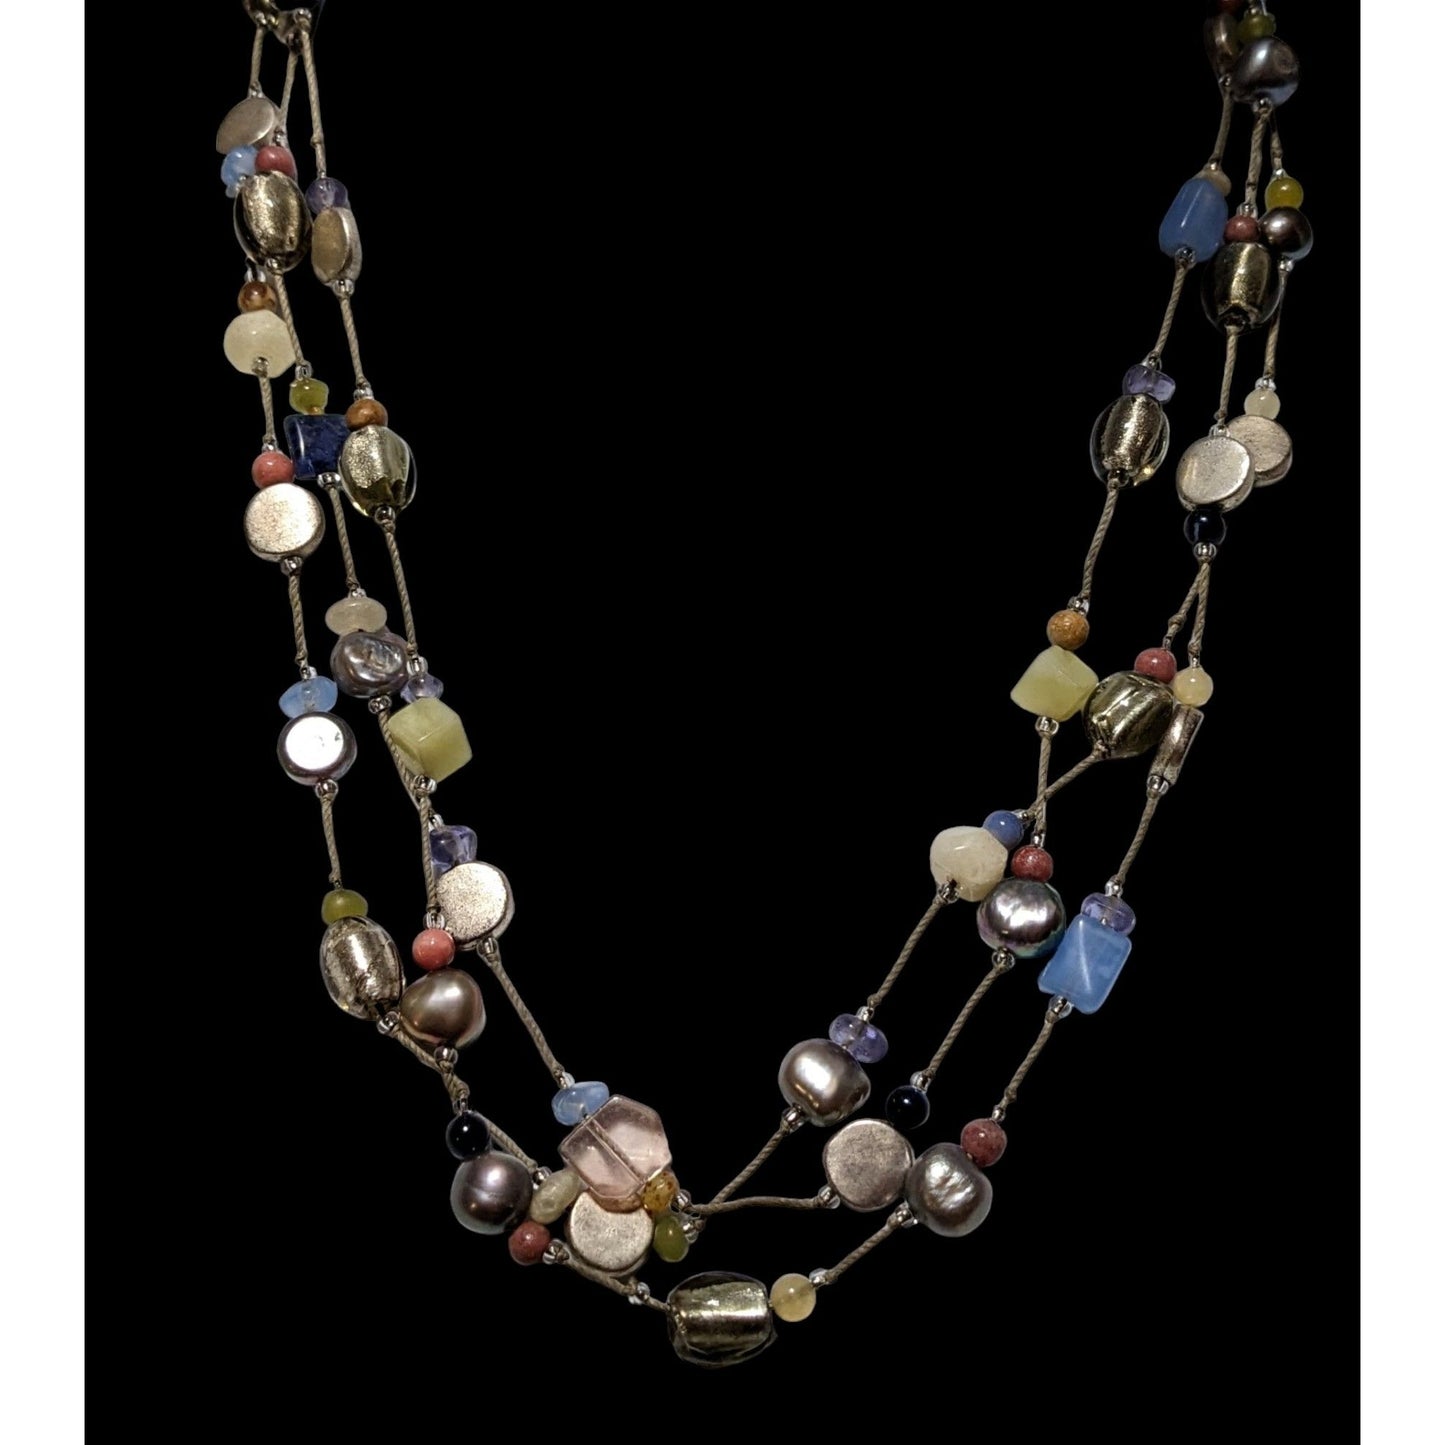 Bohemian Beaded Multilayer Necklace